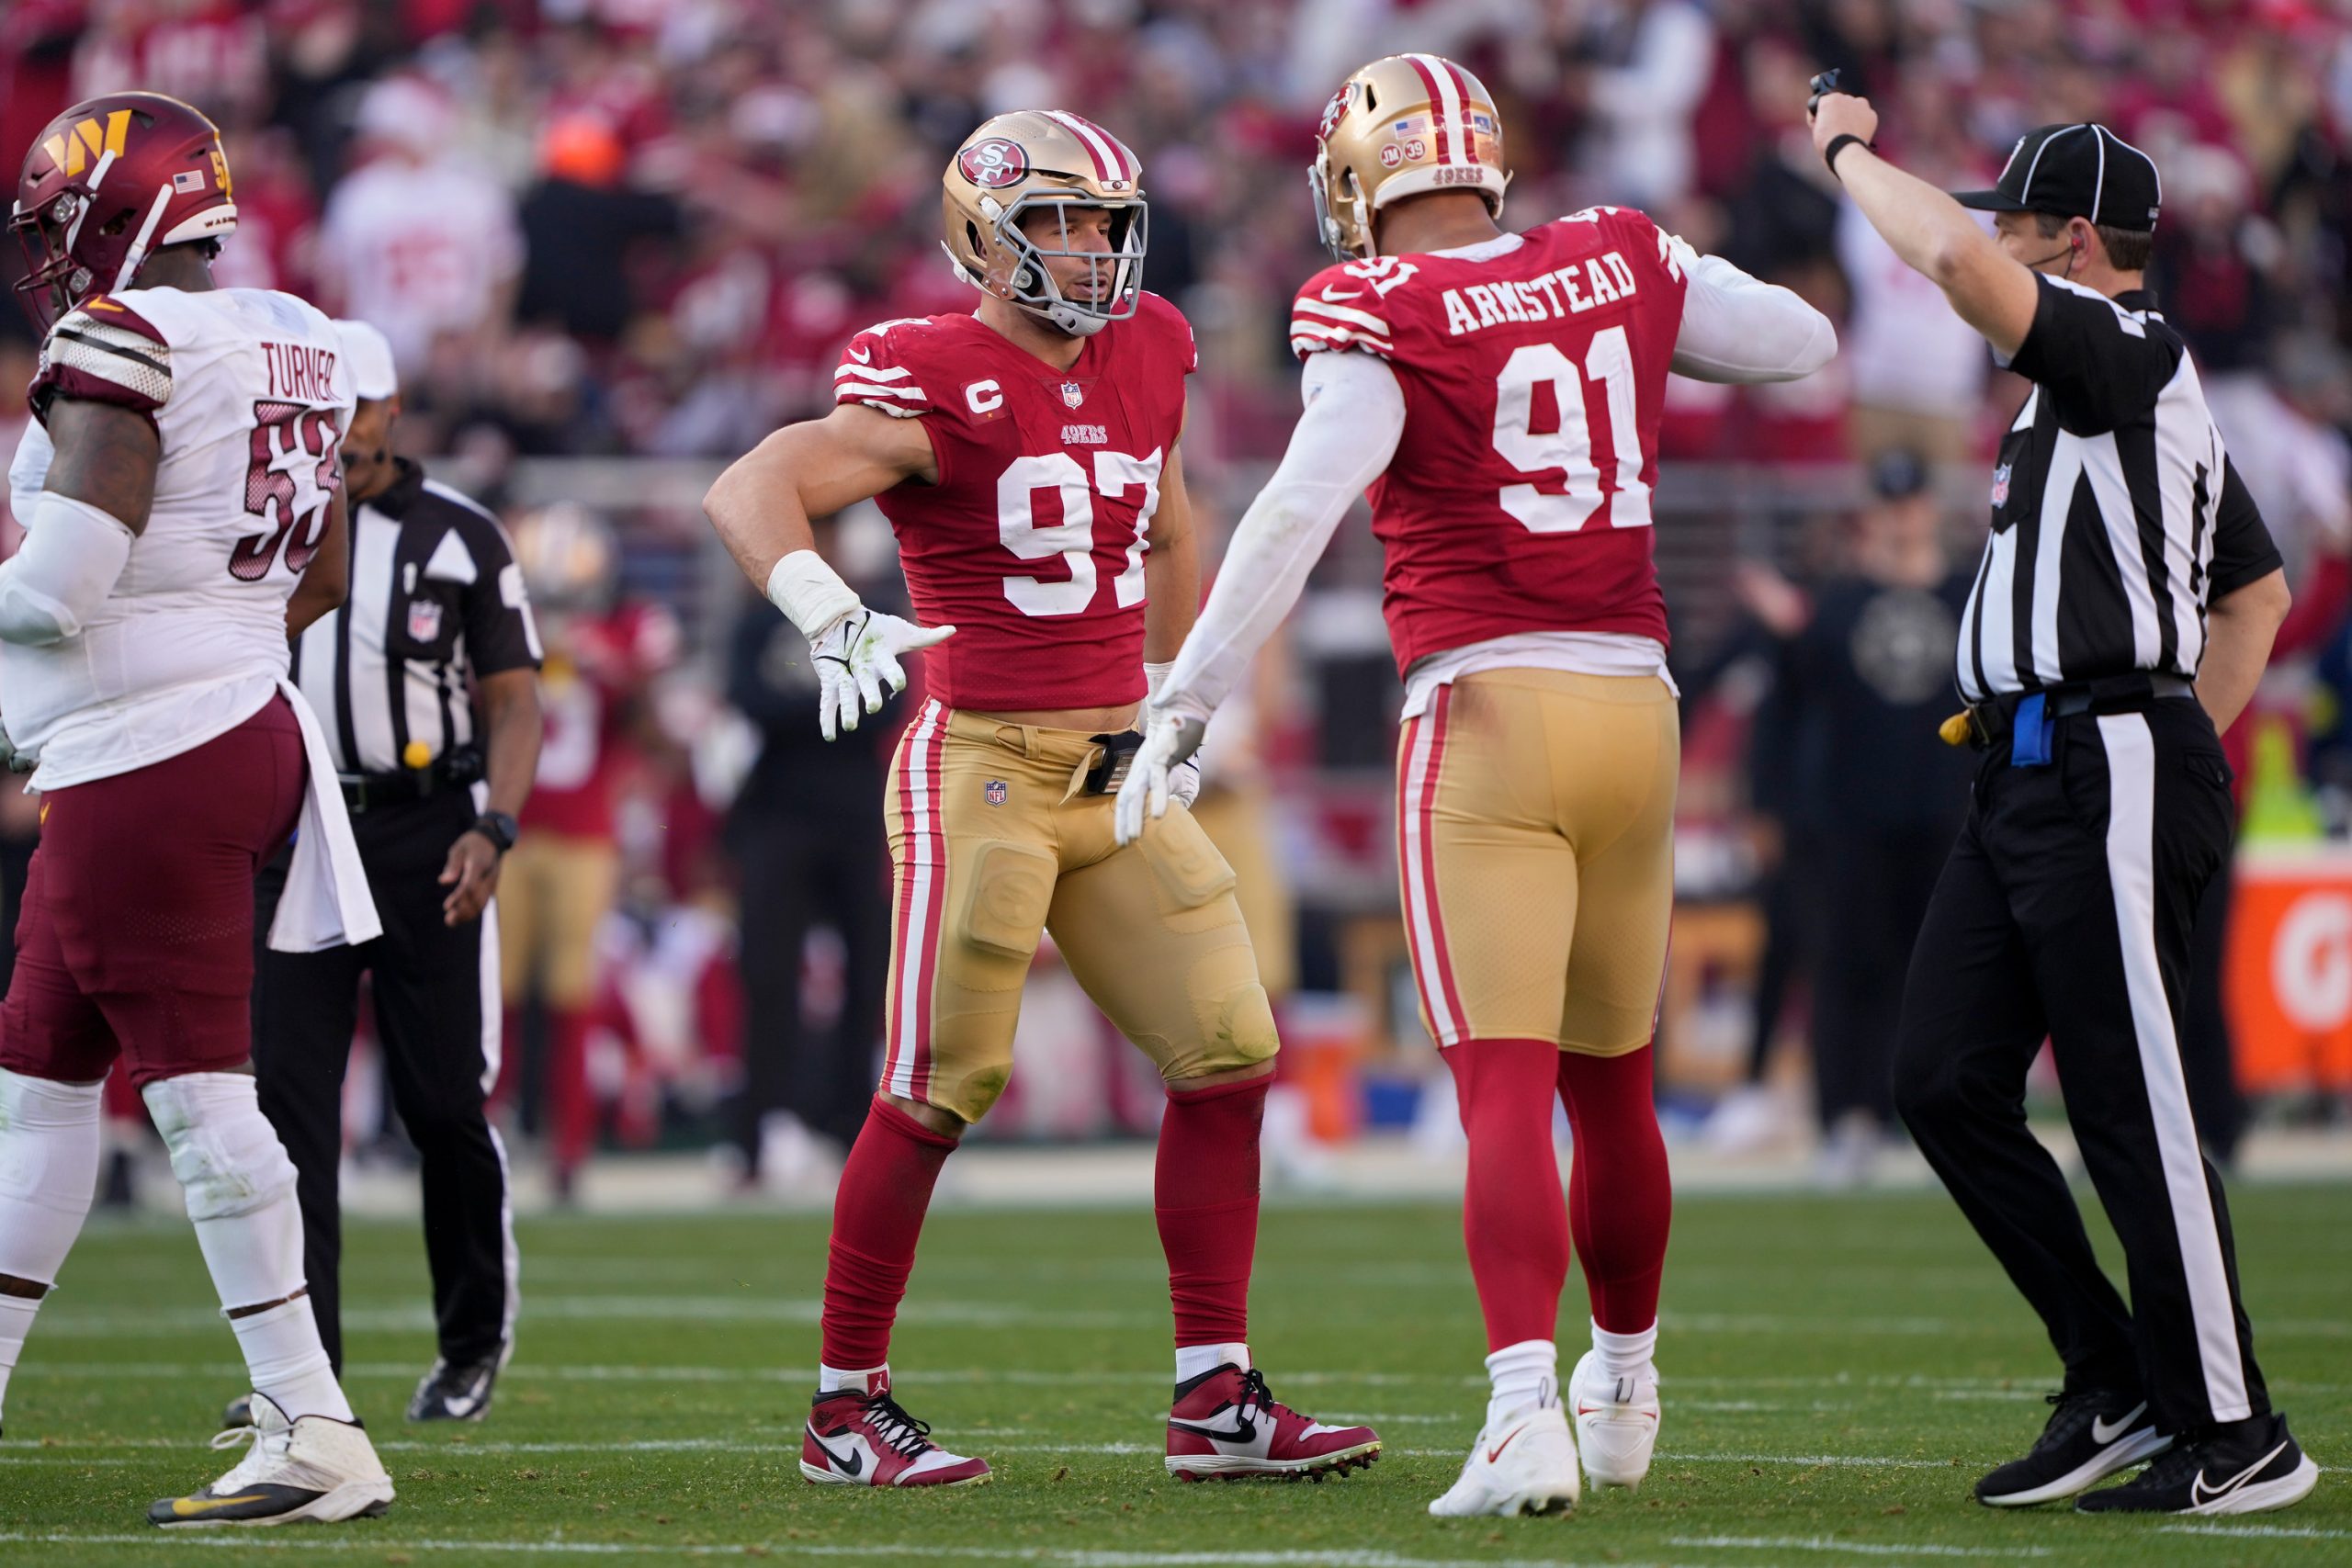 Nick Bosa #97 and Arik Armstead #91 of the San Francisco 49ers celebrate a play during the first ha...